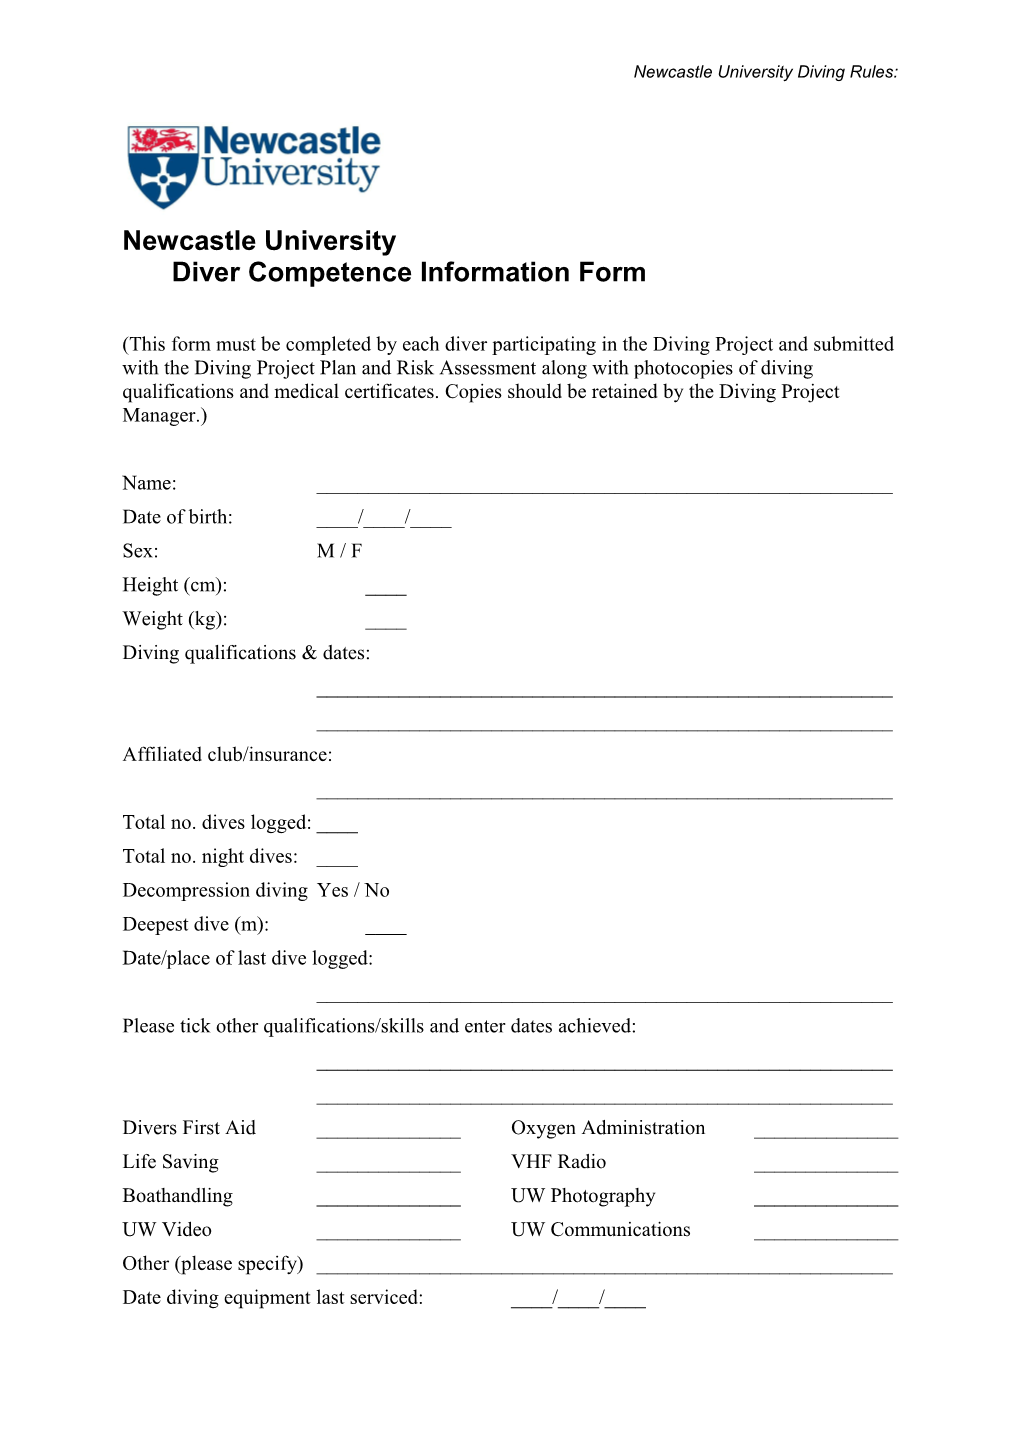 Newcastle Universitydiver Competence Information Form